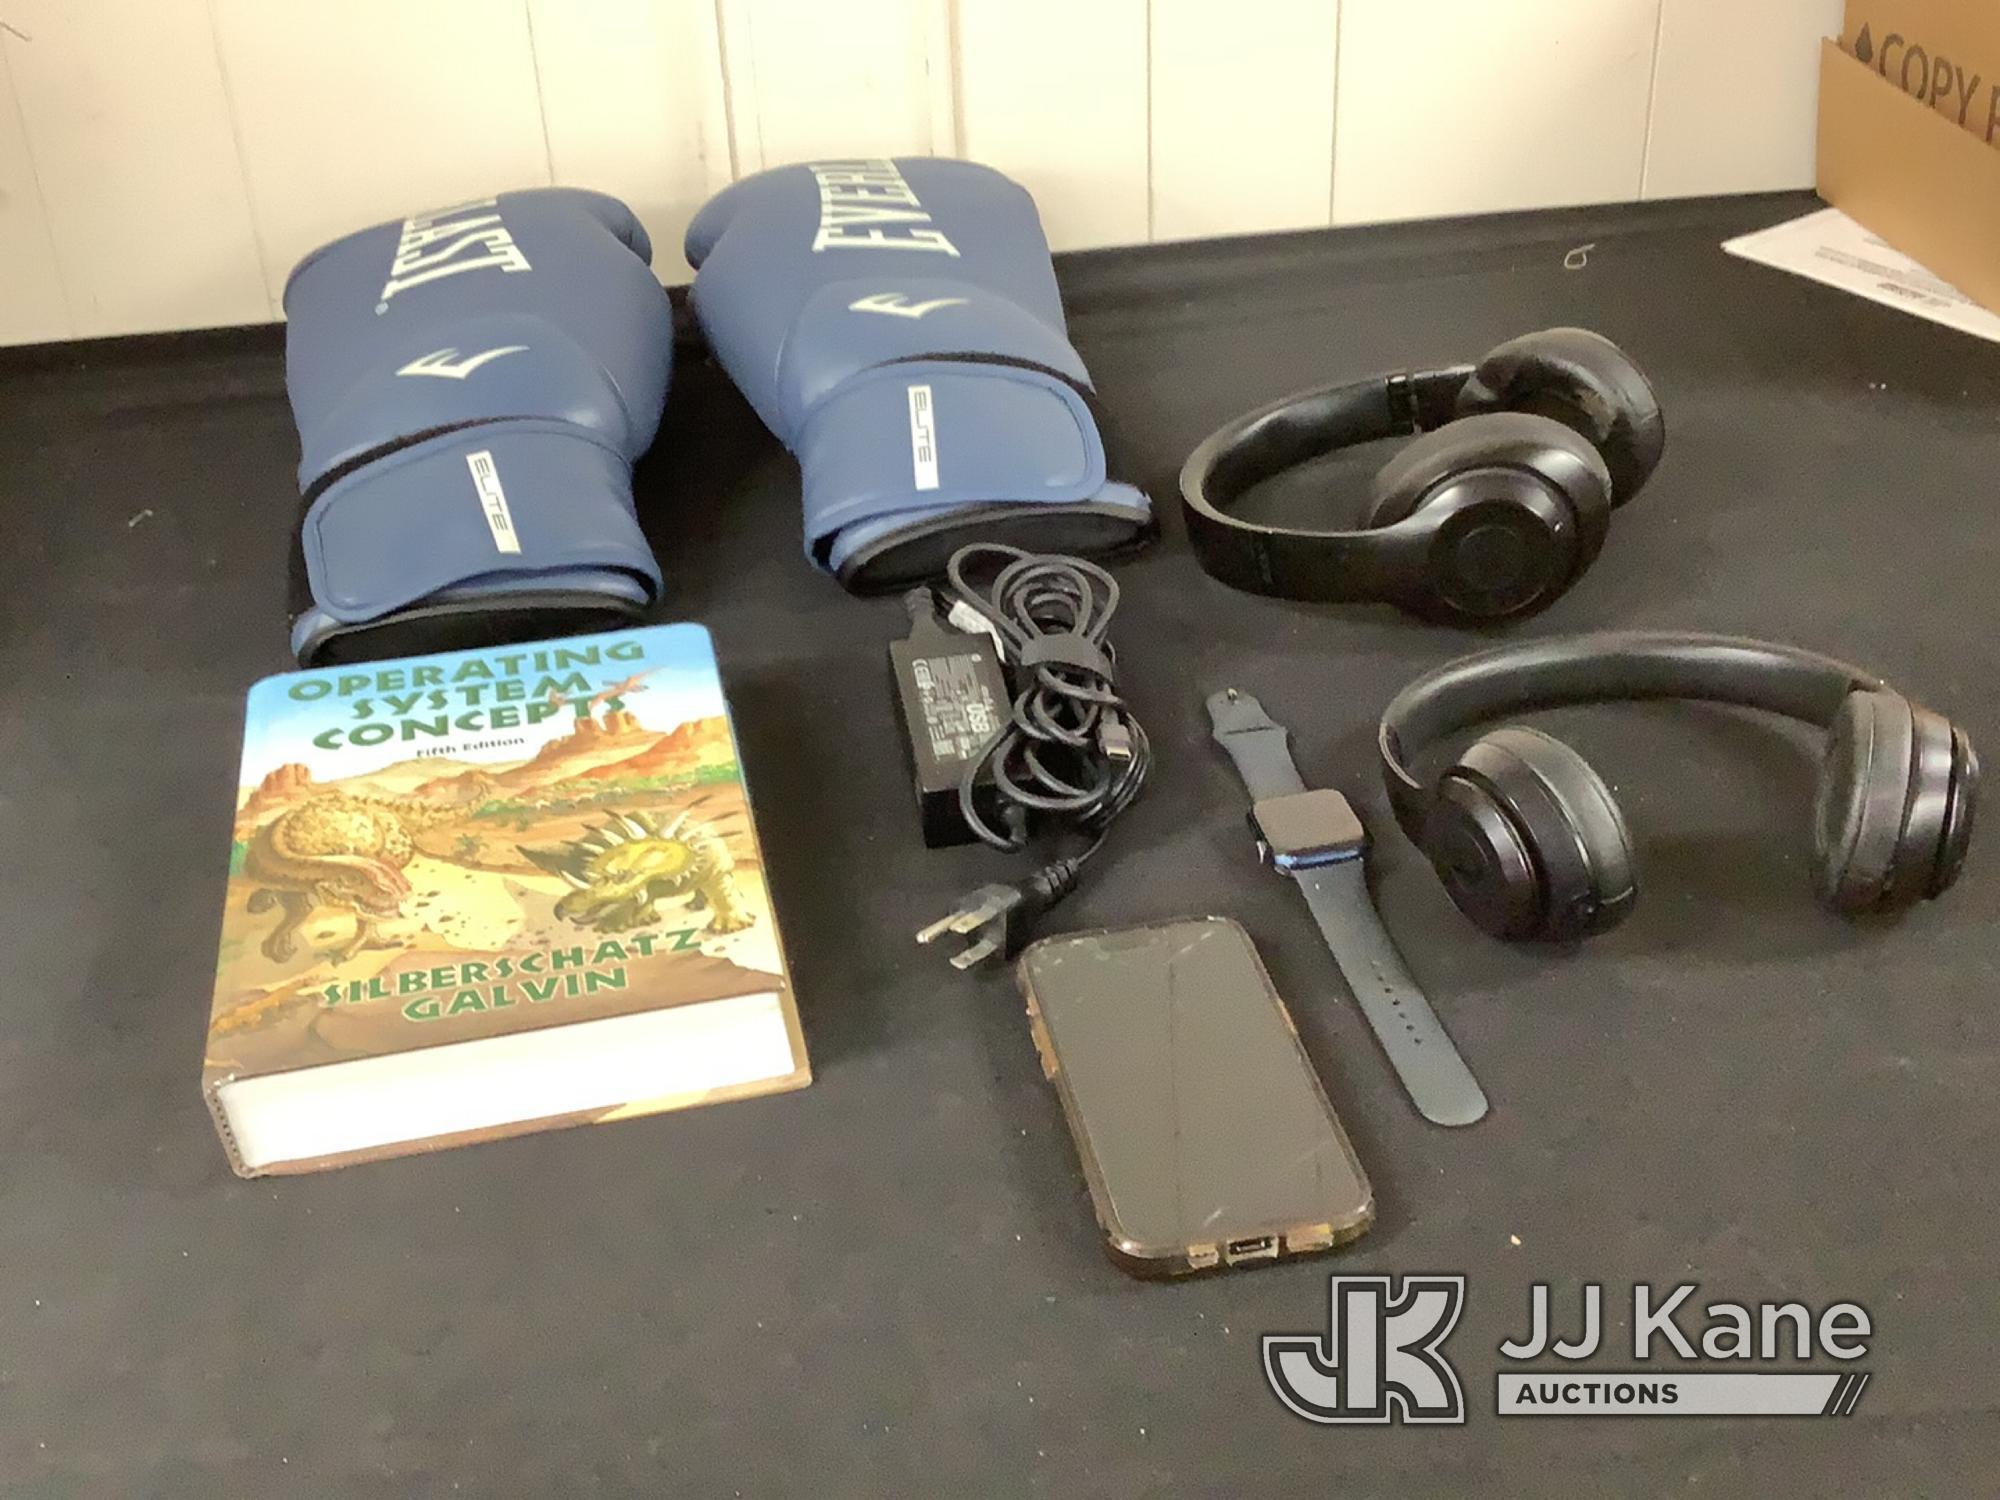 (Jurupa Valley, CA) Boxing gloves | headphones | iPhone possibly locked | book (Used) NOTE: This uni